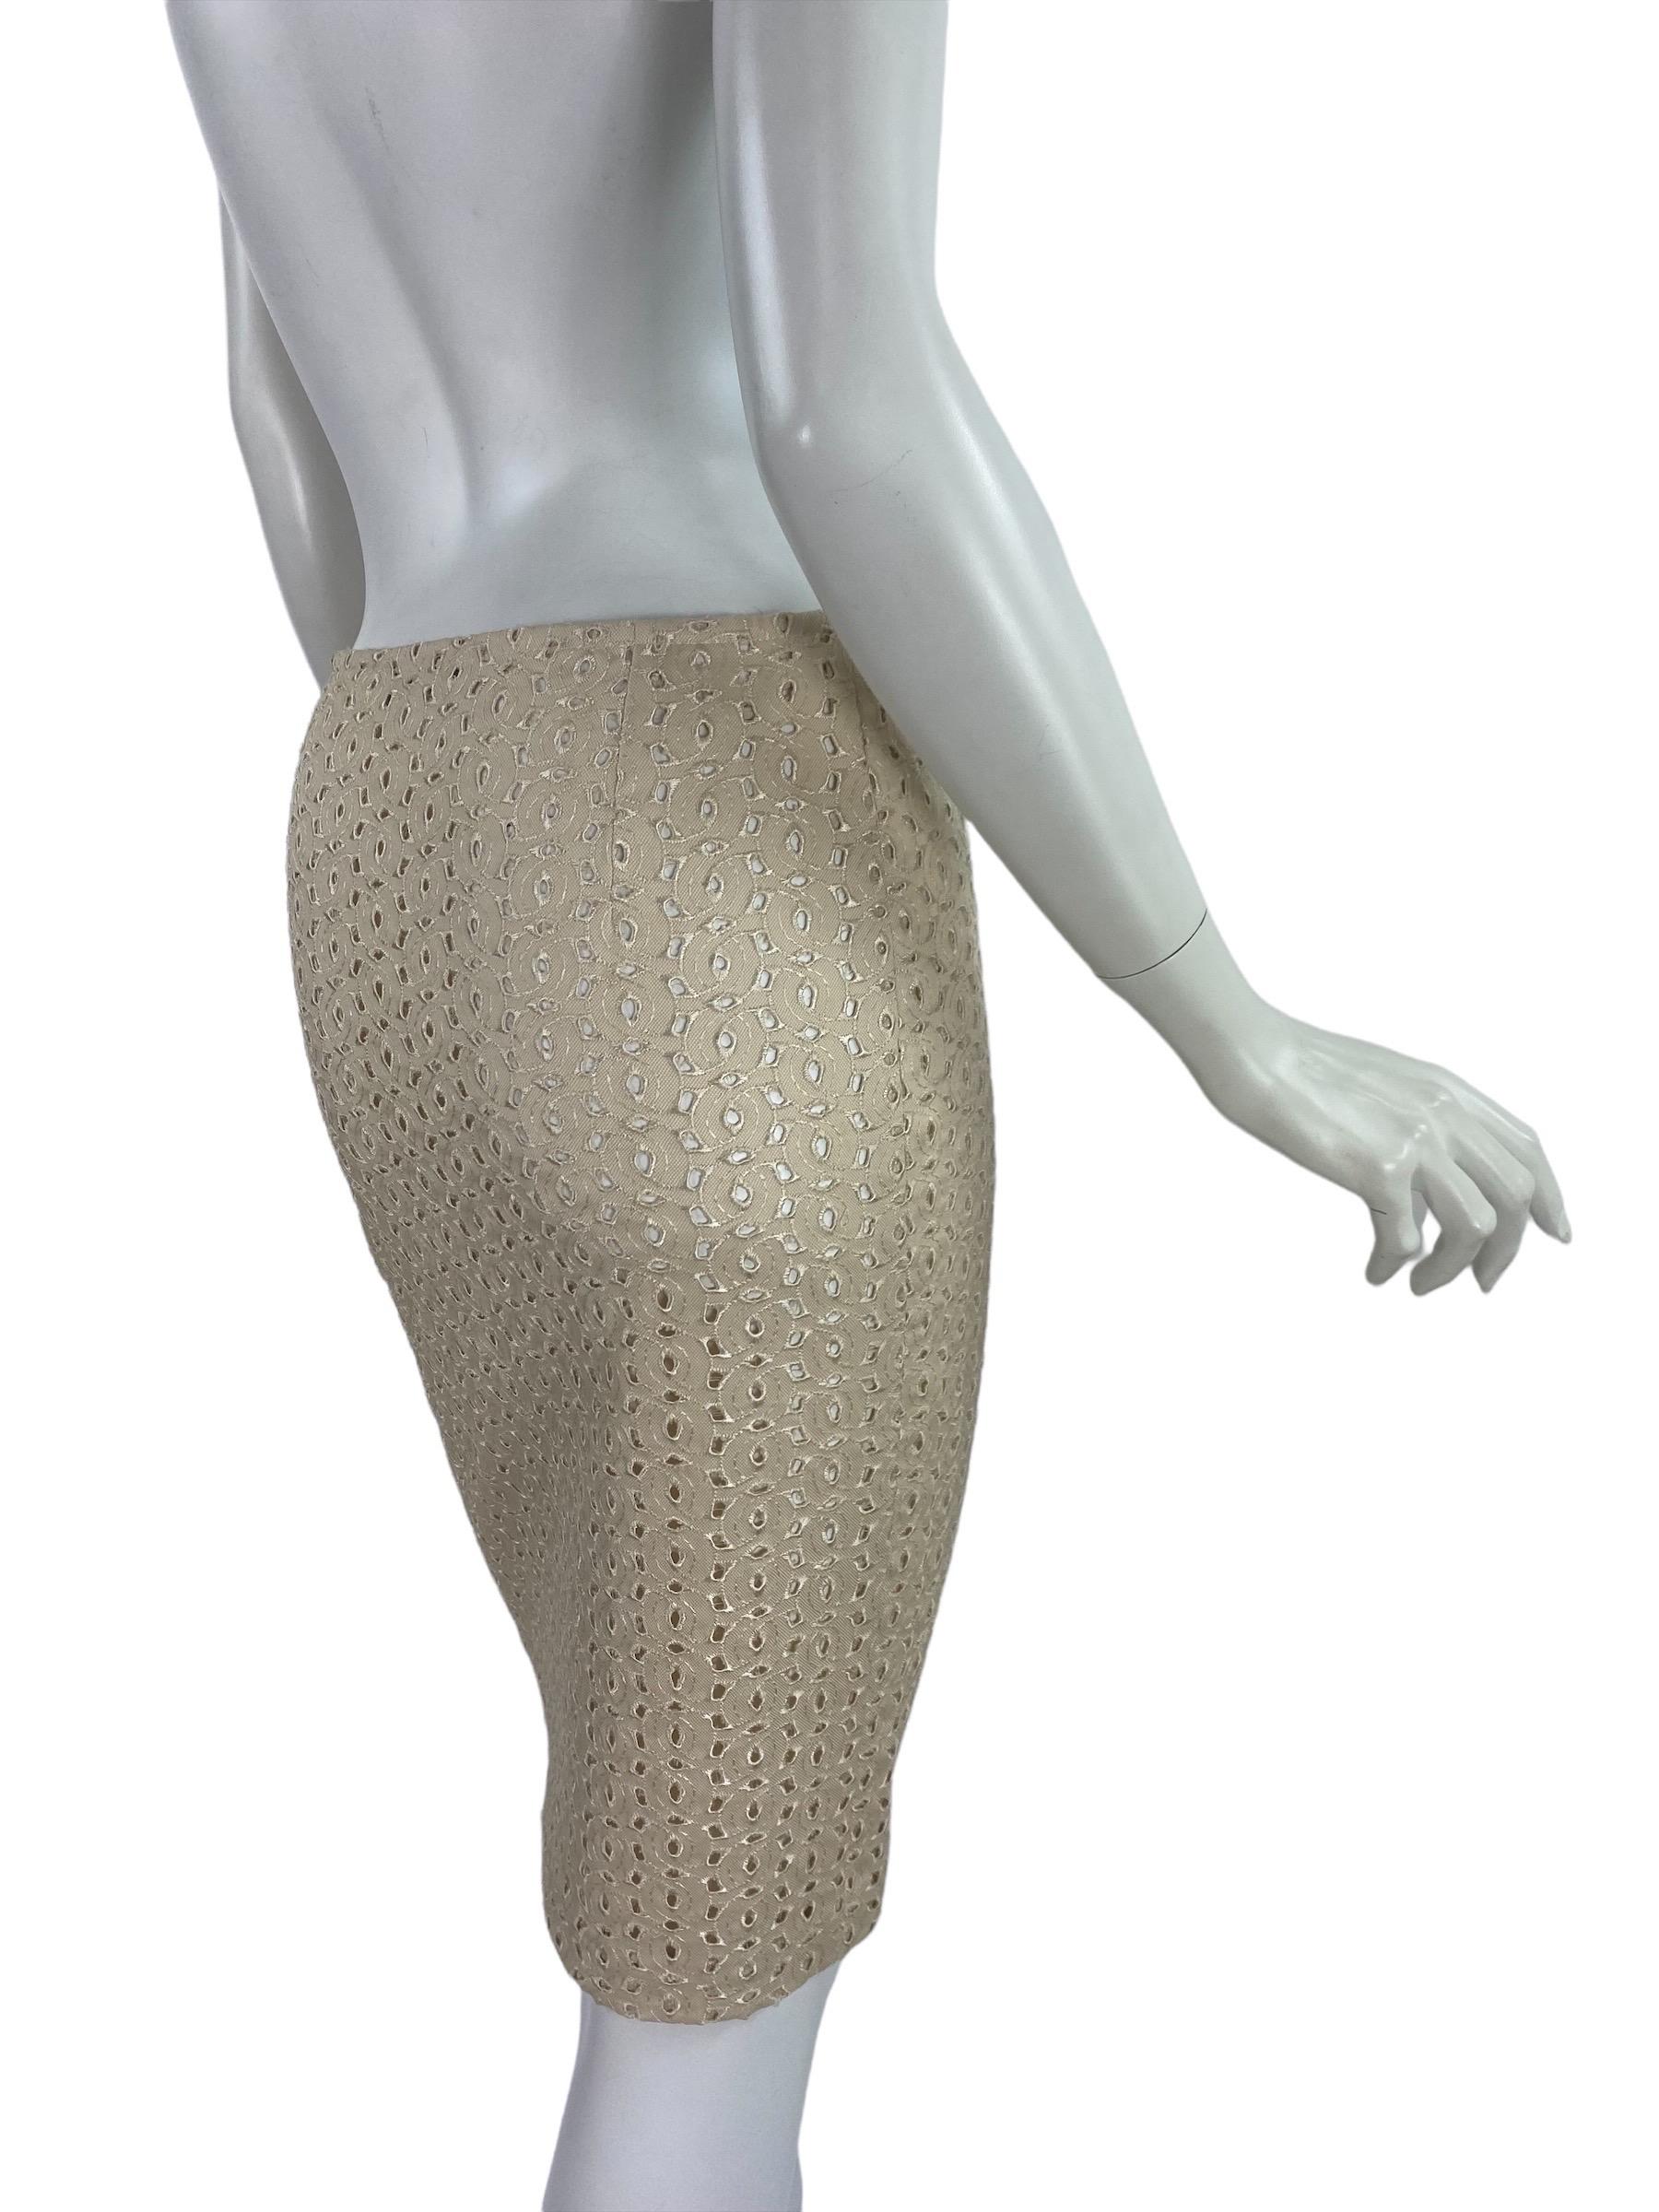 Vintage Gianni Versace Couture Nude Eyelet Pencil Skirt 
S/S 2002 Collection
Italian 38 ( US 4 )
Nude Eyelet 100% Cotton, Unlined, Side zip.
Measurements: Waist 29 inches, hips 35